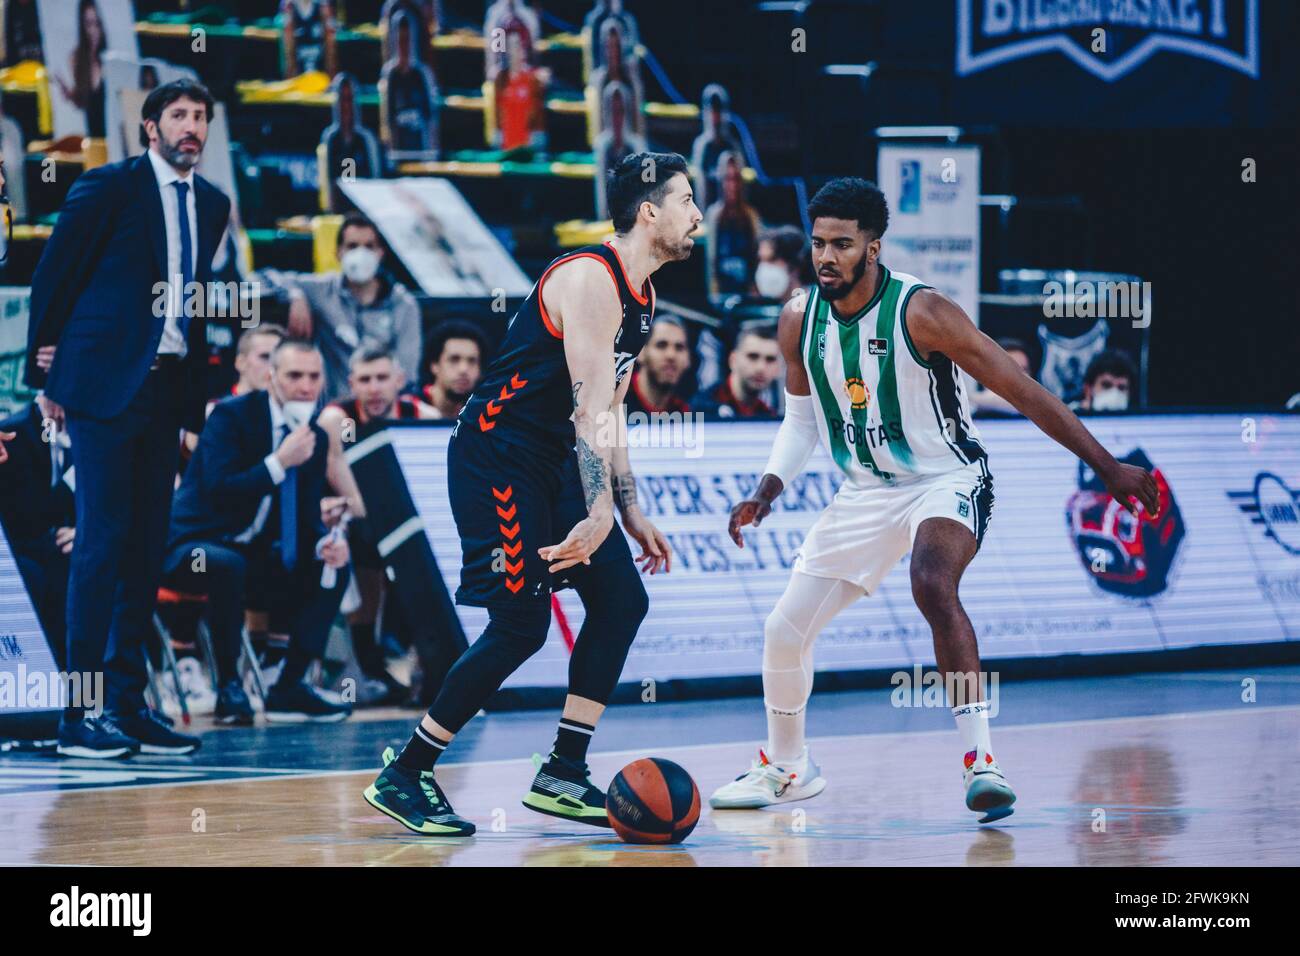 Bilbao, Basque Country, SPAIN. 23rd May, 2021. IOANNIS ATHINAIOU (17) from  Bilbao Basket with the ball during the Liga ACB game between Bilbao Basket  and Joventut at Miribilla Bilbao Arena. Bilbao won